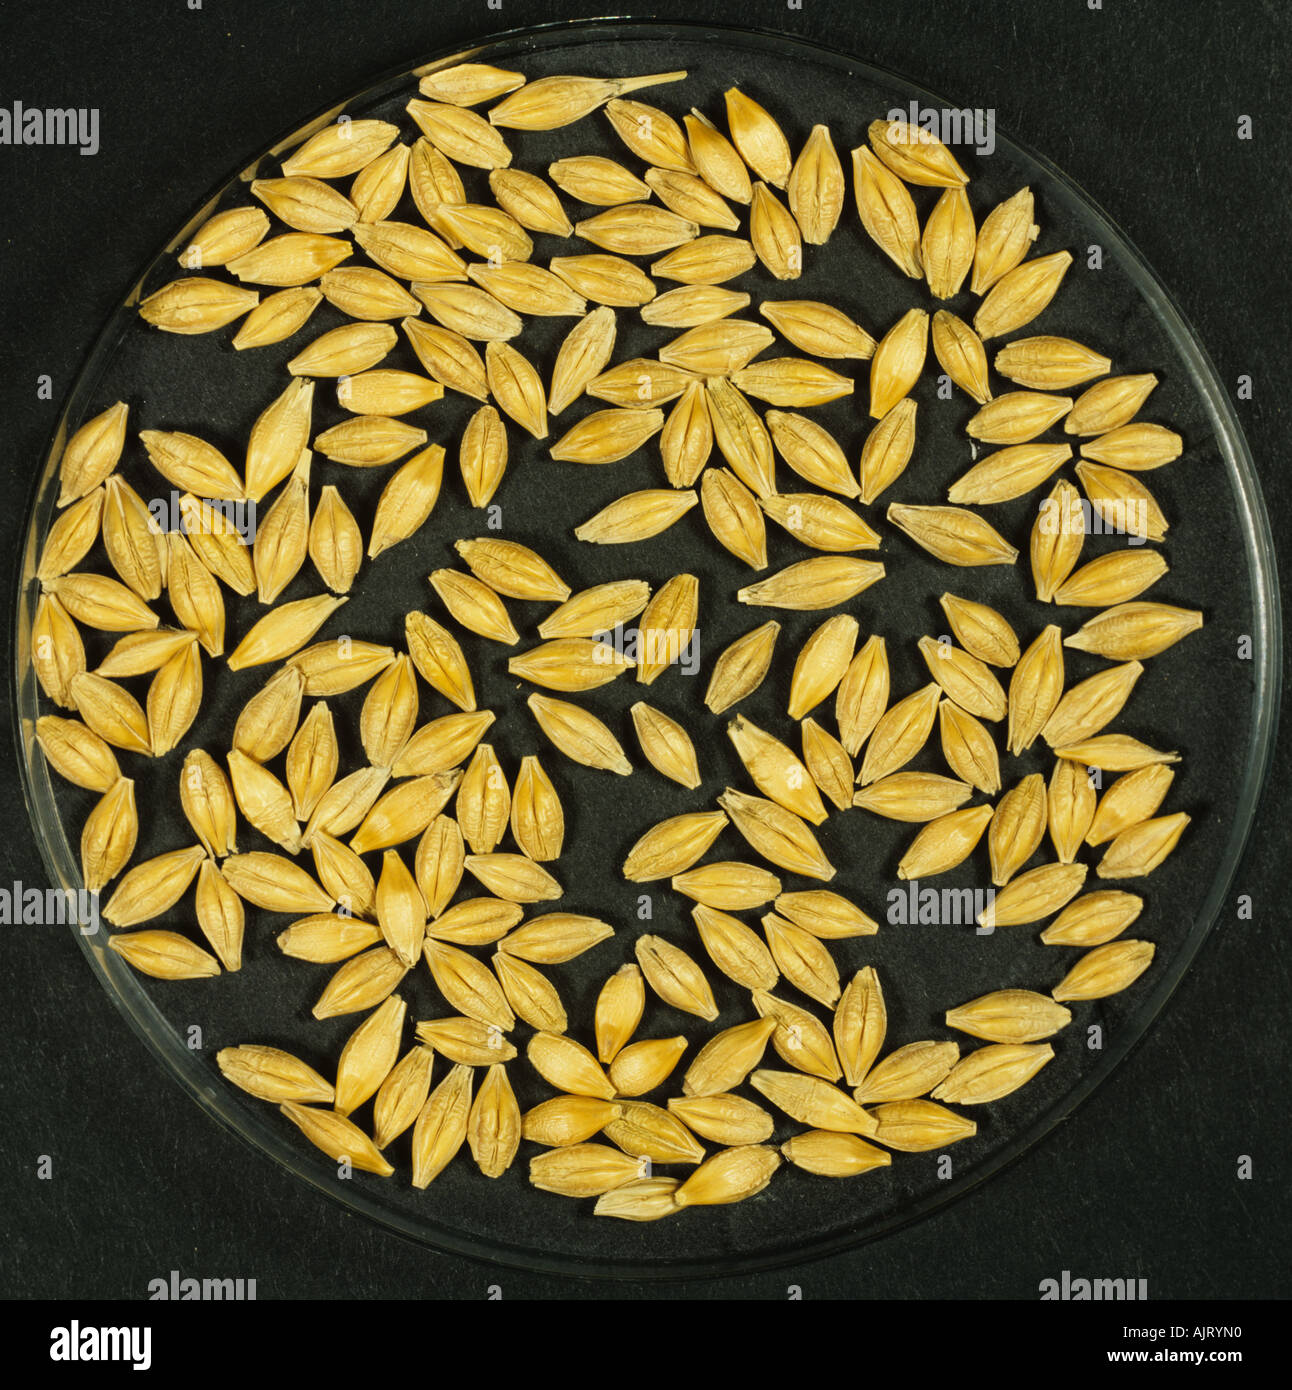 Process of malting barley seed stage one before germination Stock Photo